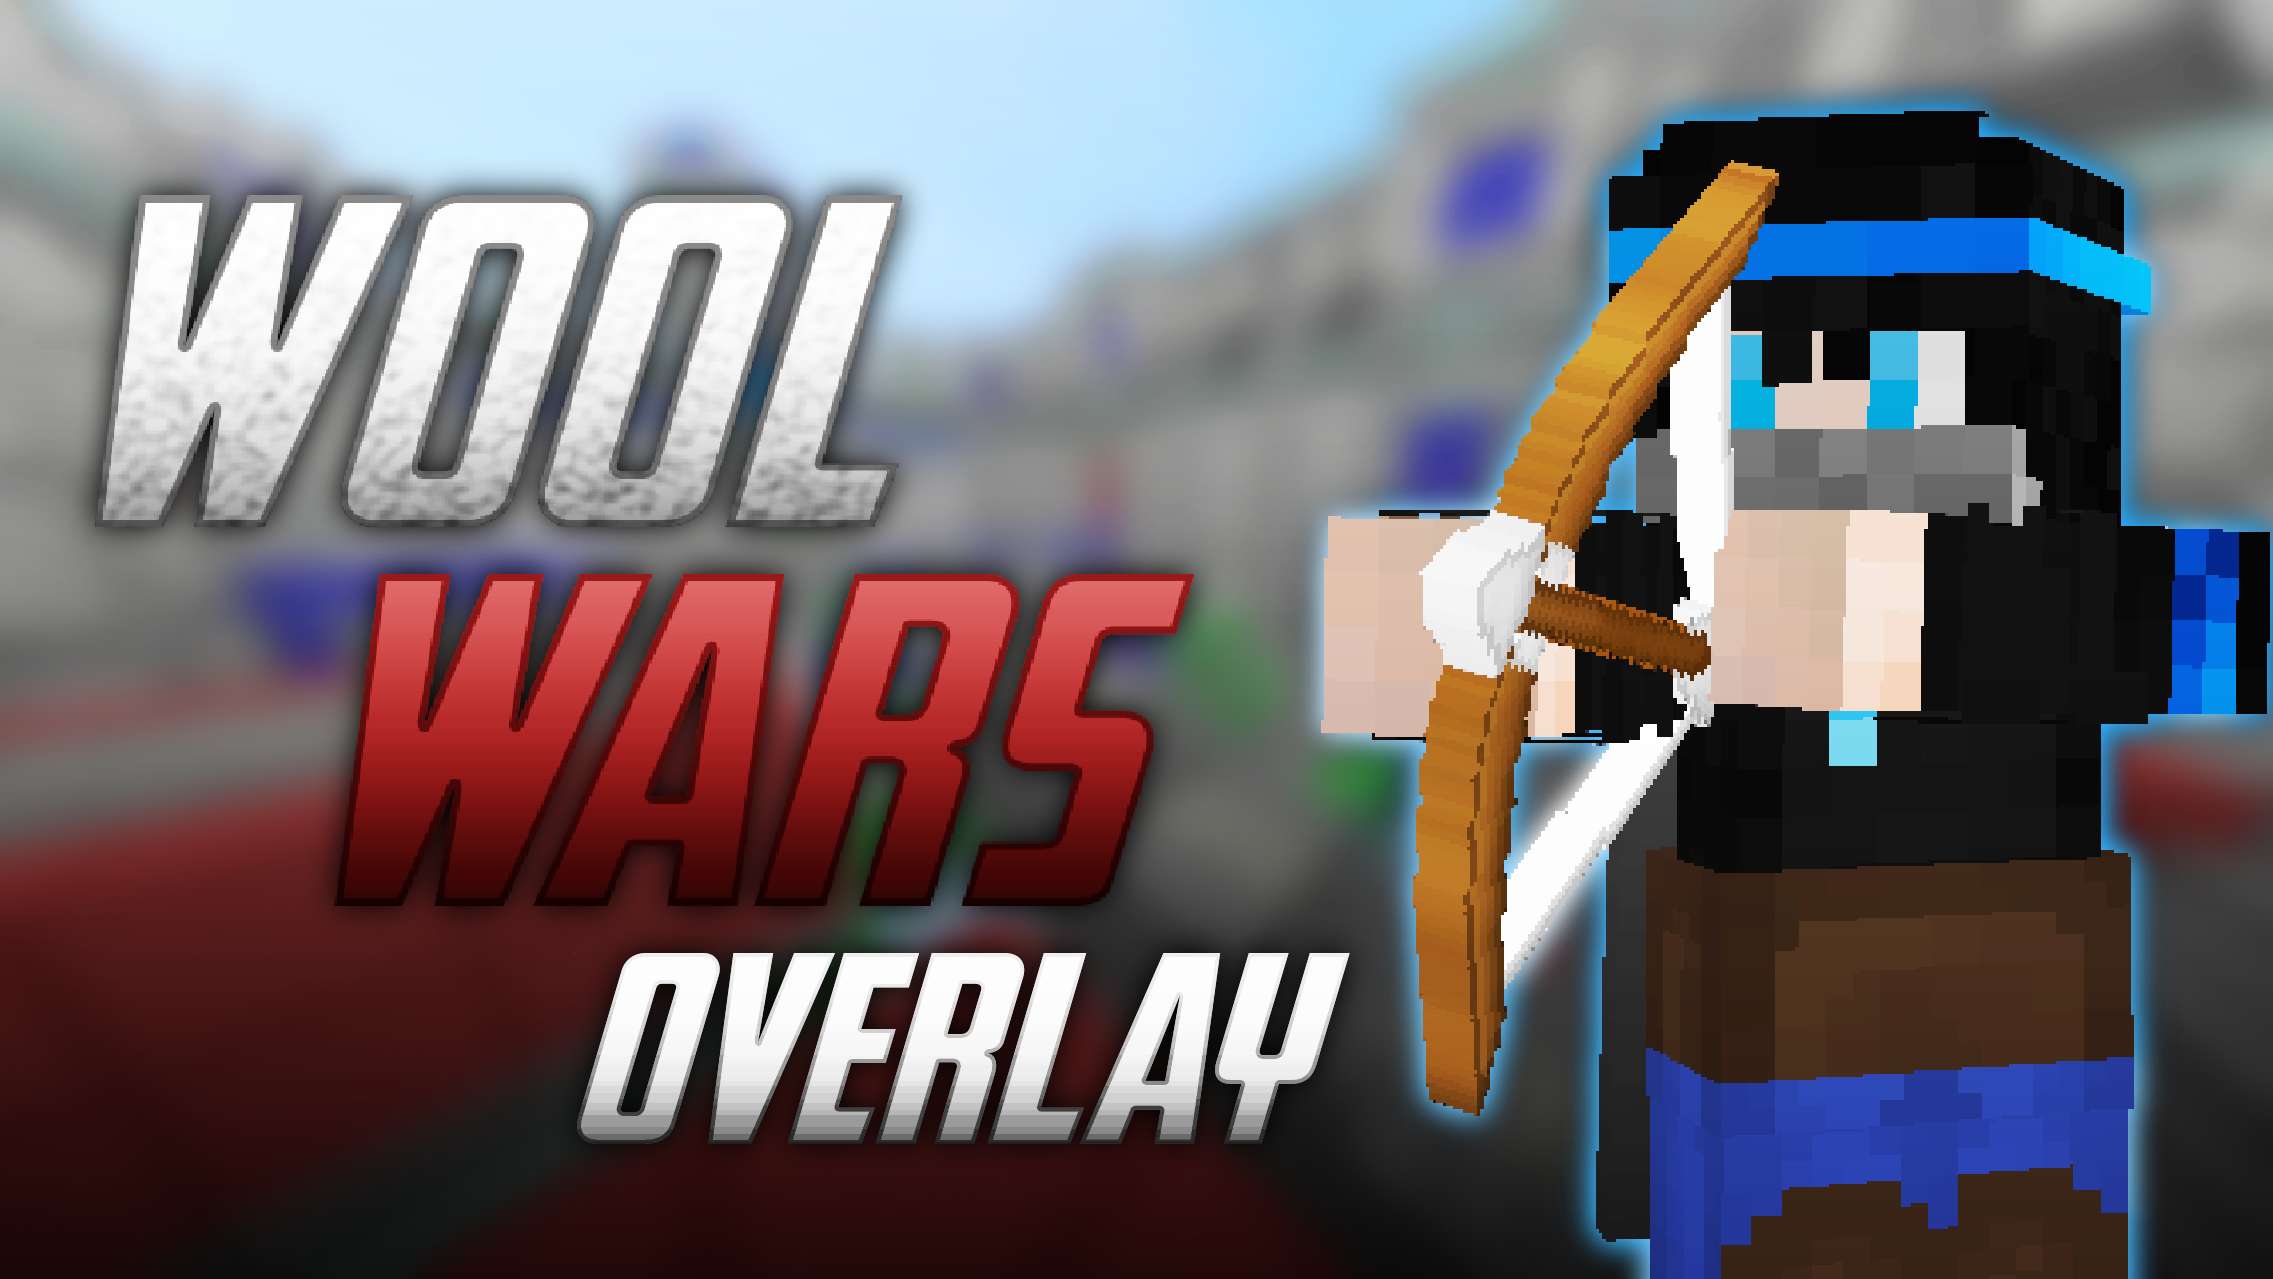 Wool Wars Overlay | Timepass 600 64x by Mqryo on PvPRP